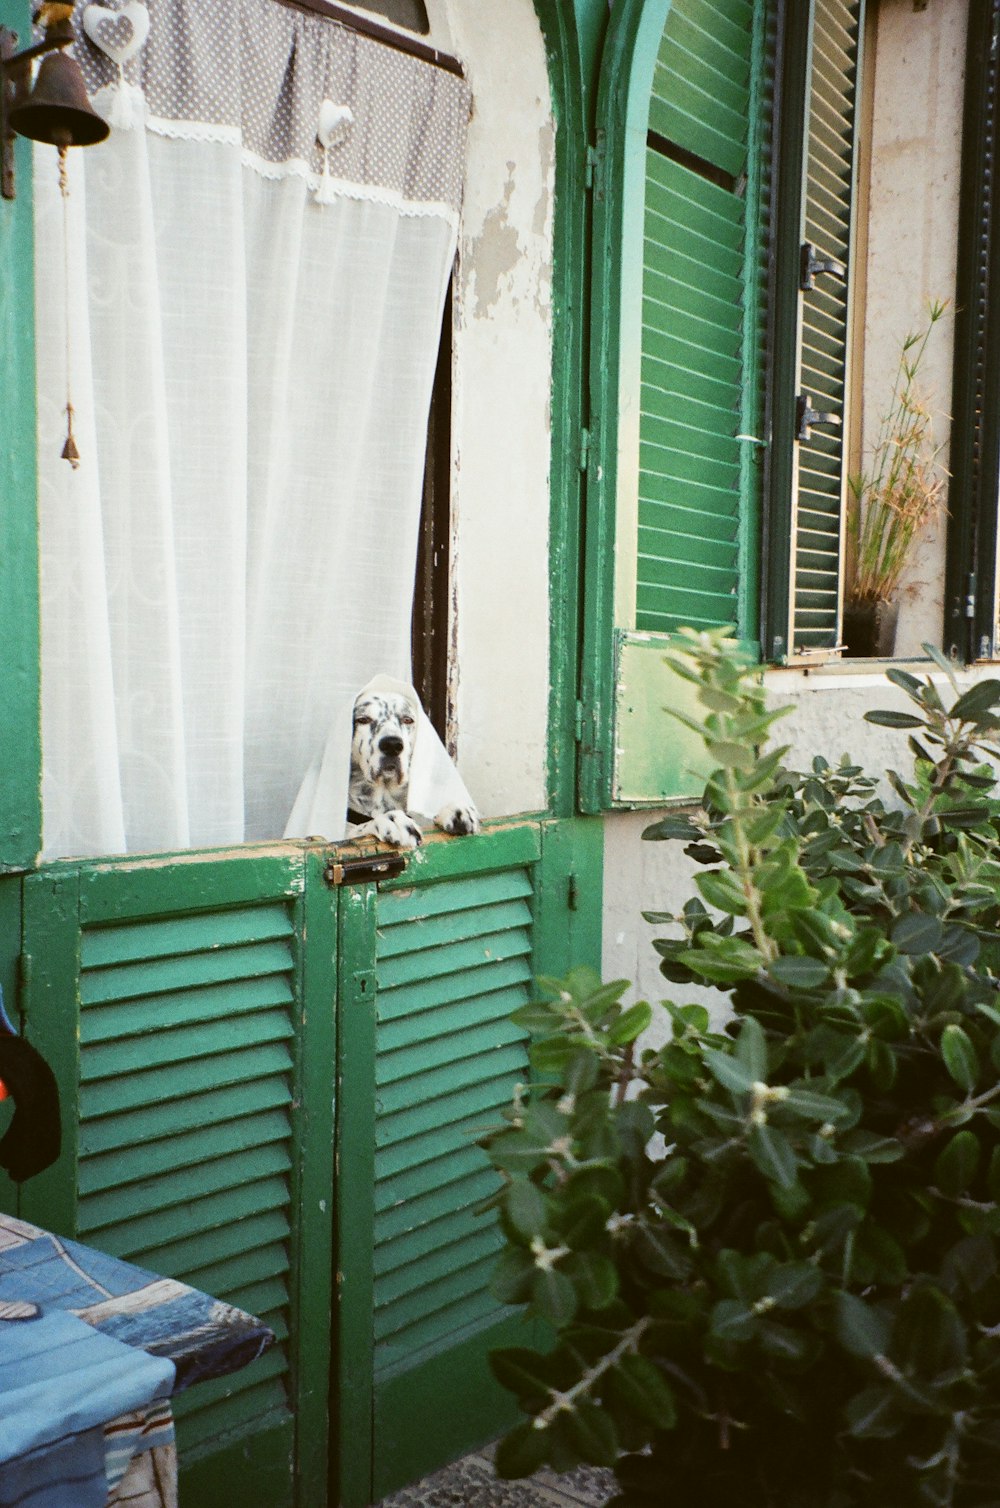 white and black short coated dog on green wooden door